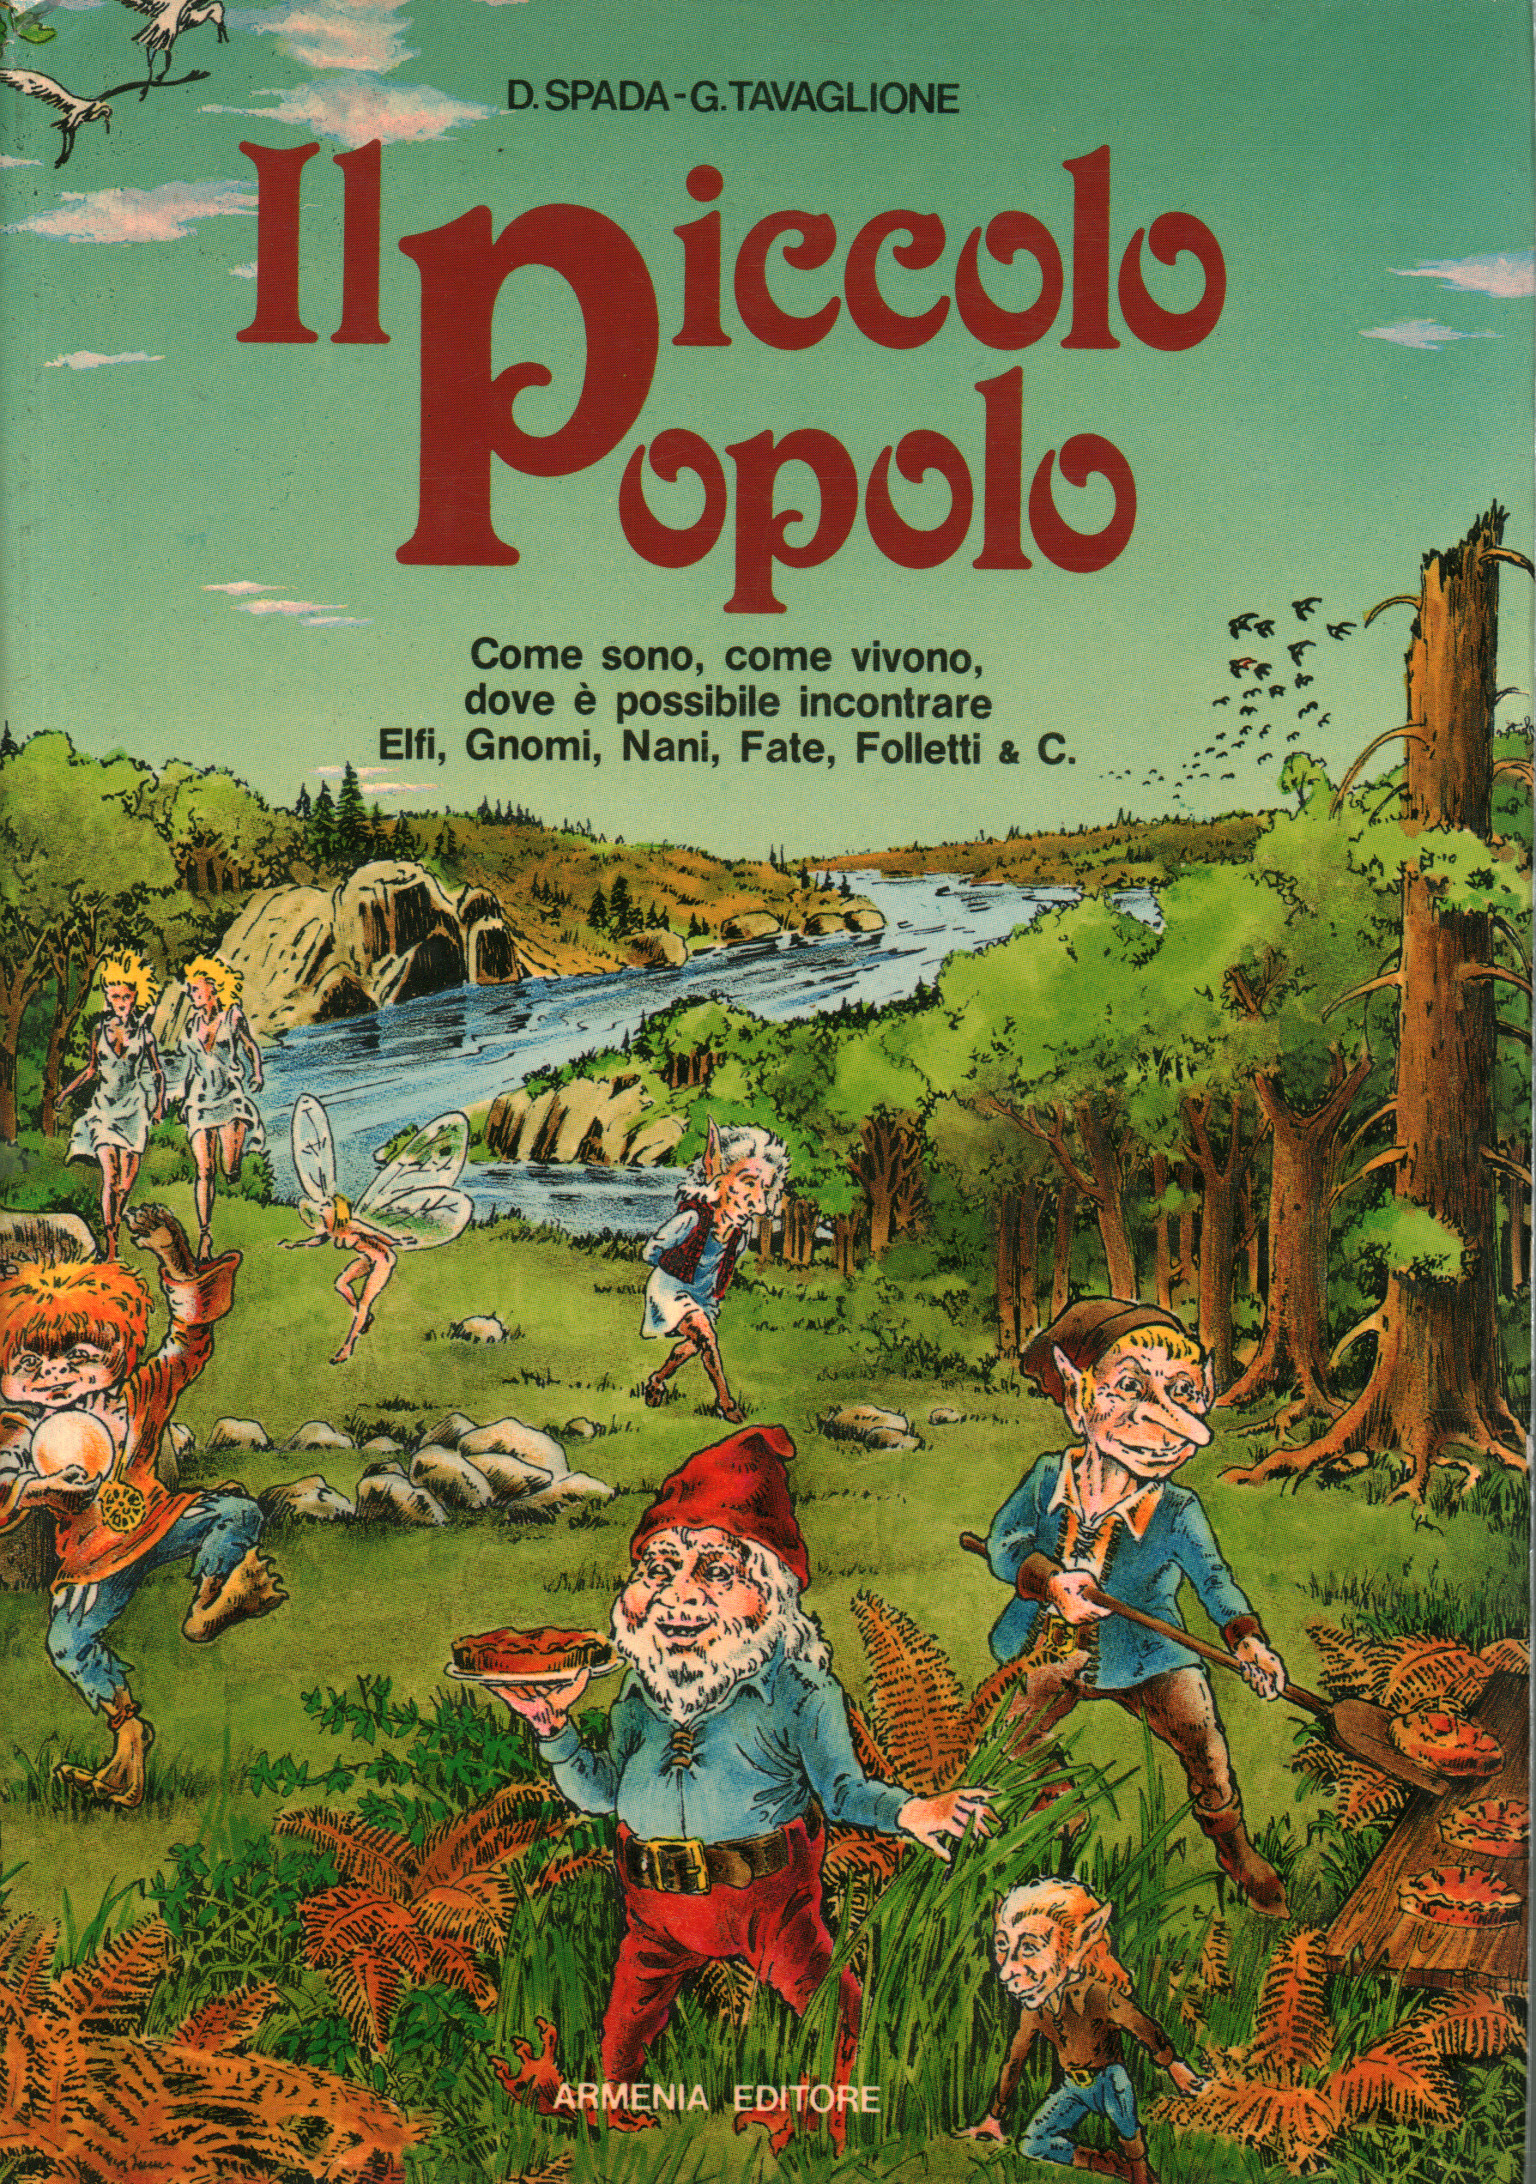 The little people